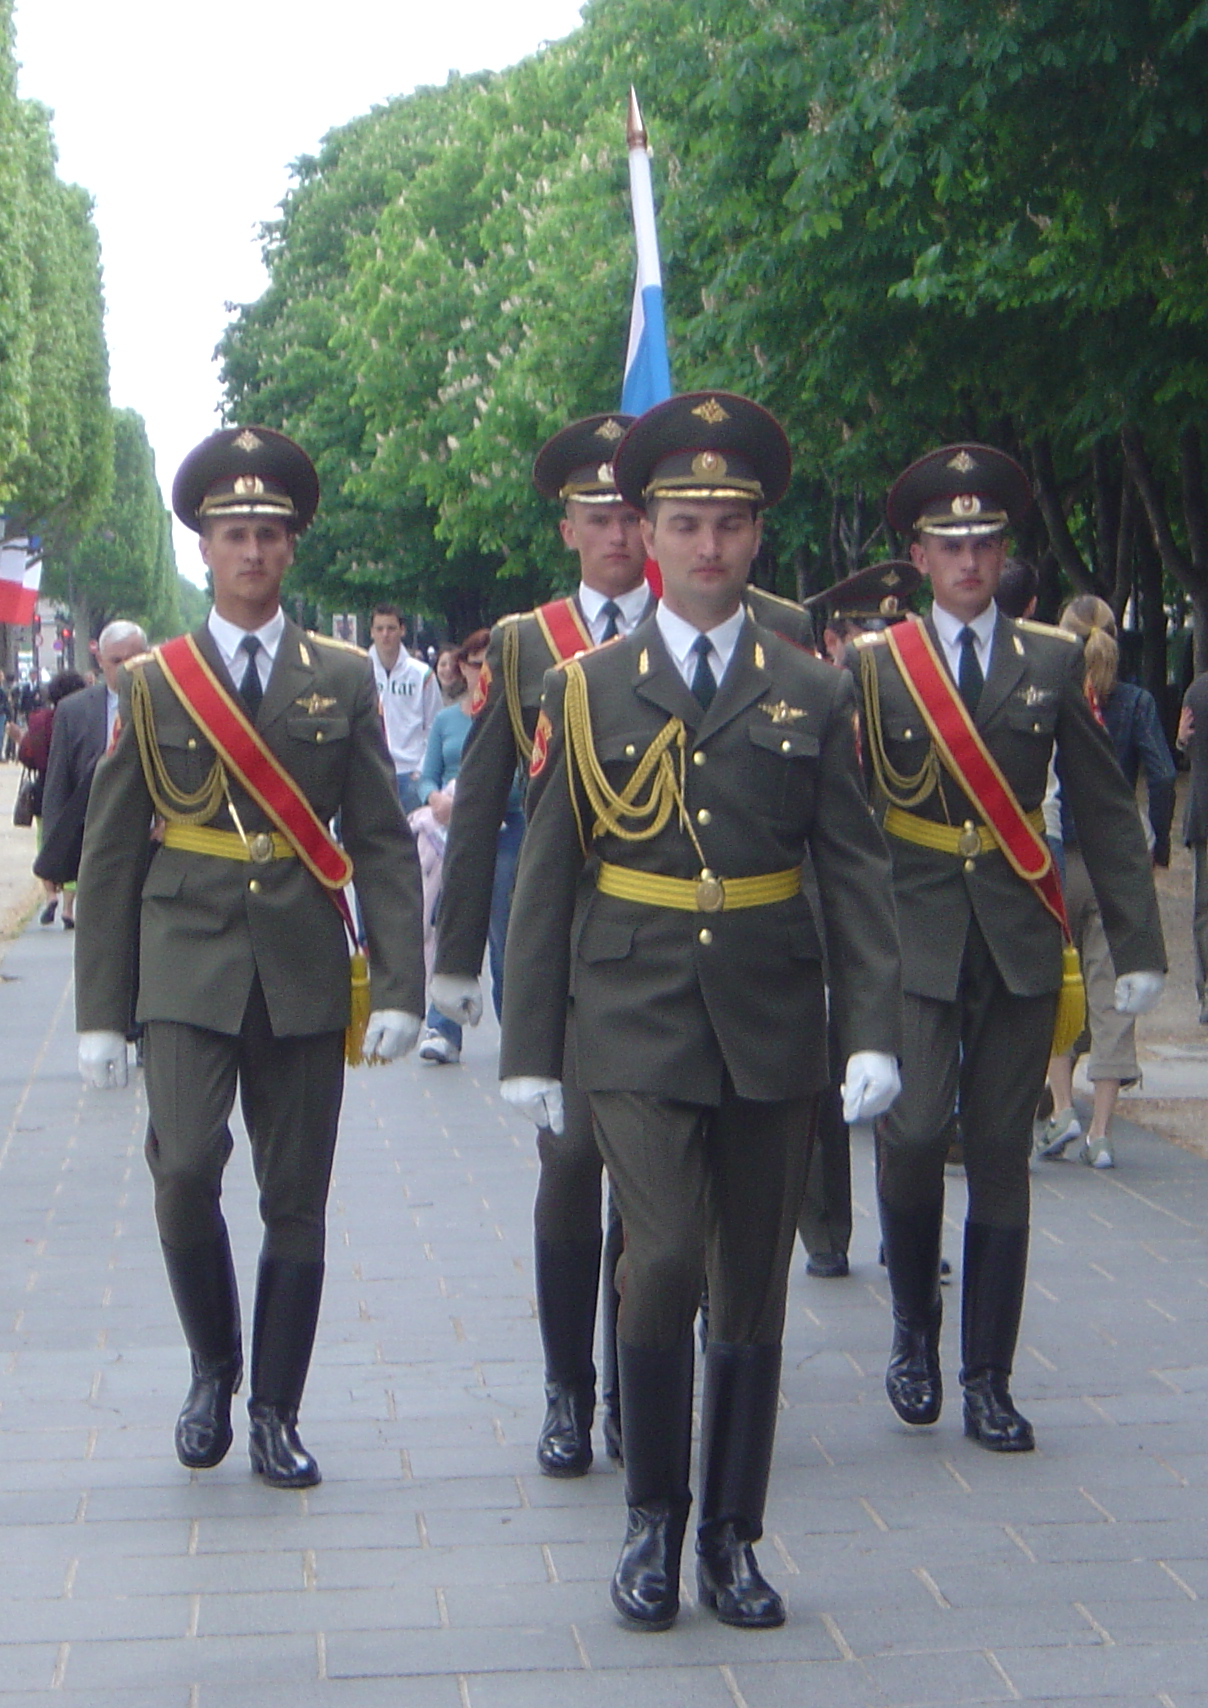 Russian soldiers on the Champs Elysees DSC03310.JPG